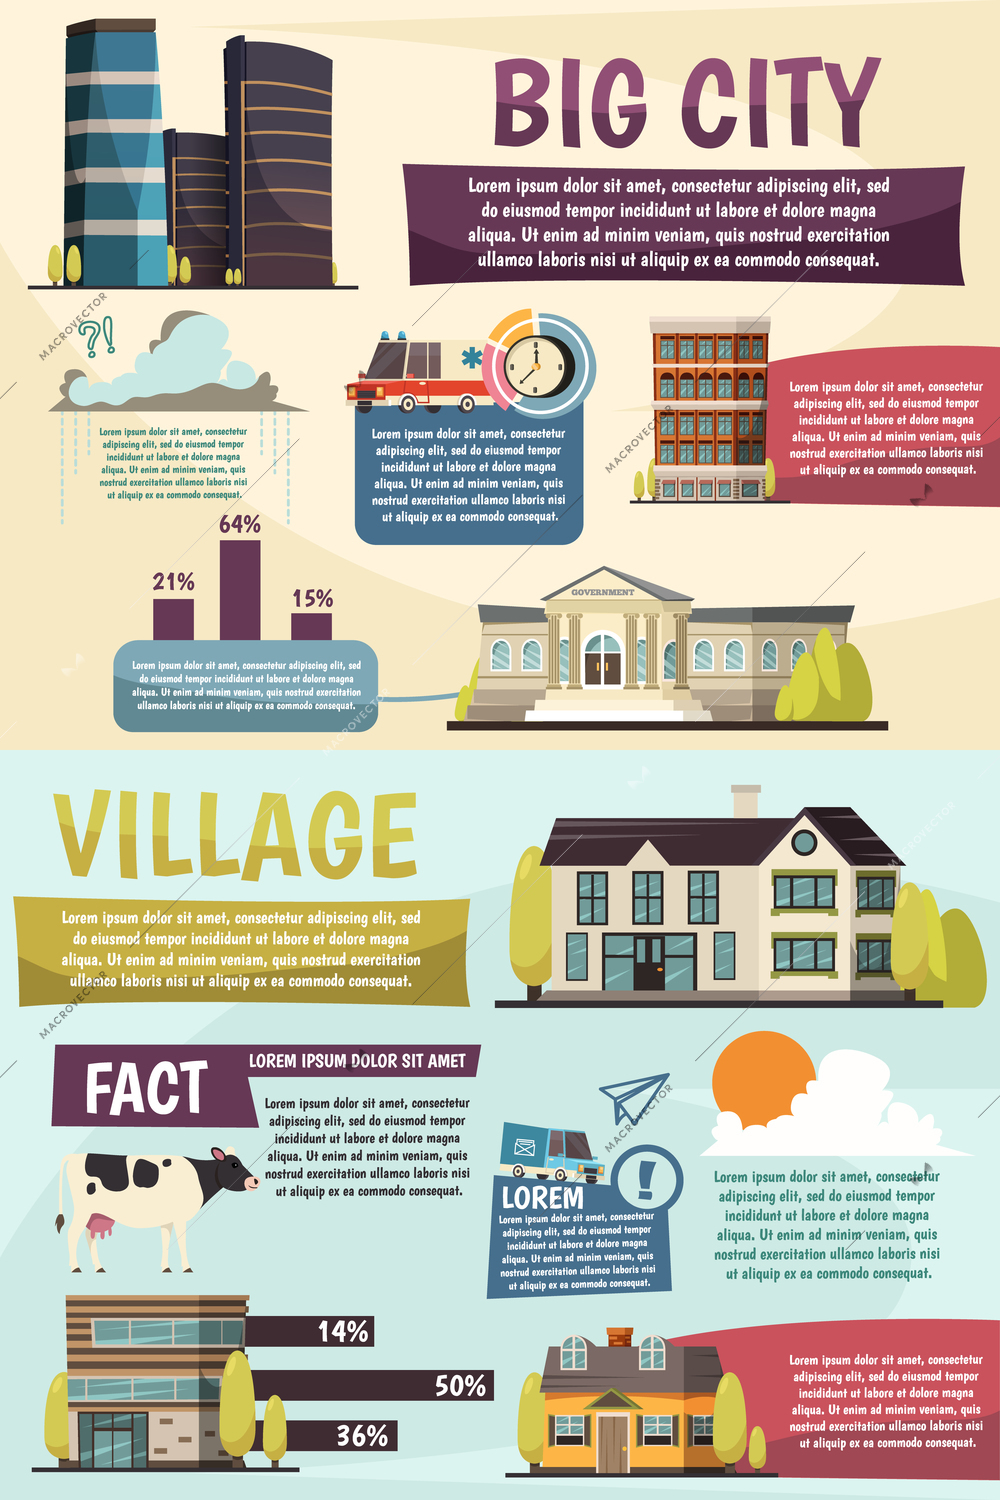 Big city infographics orthogonal layout with house images and information about different types of buildings for town and village flat vector illustration